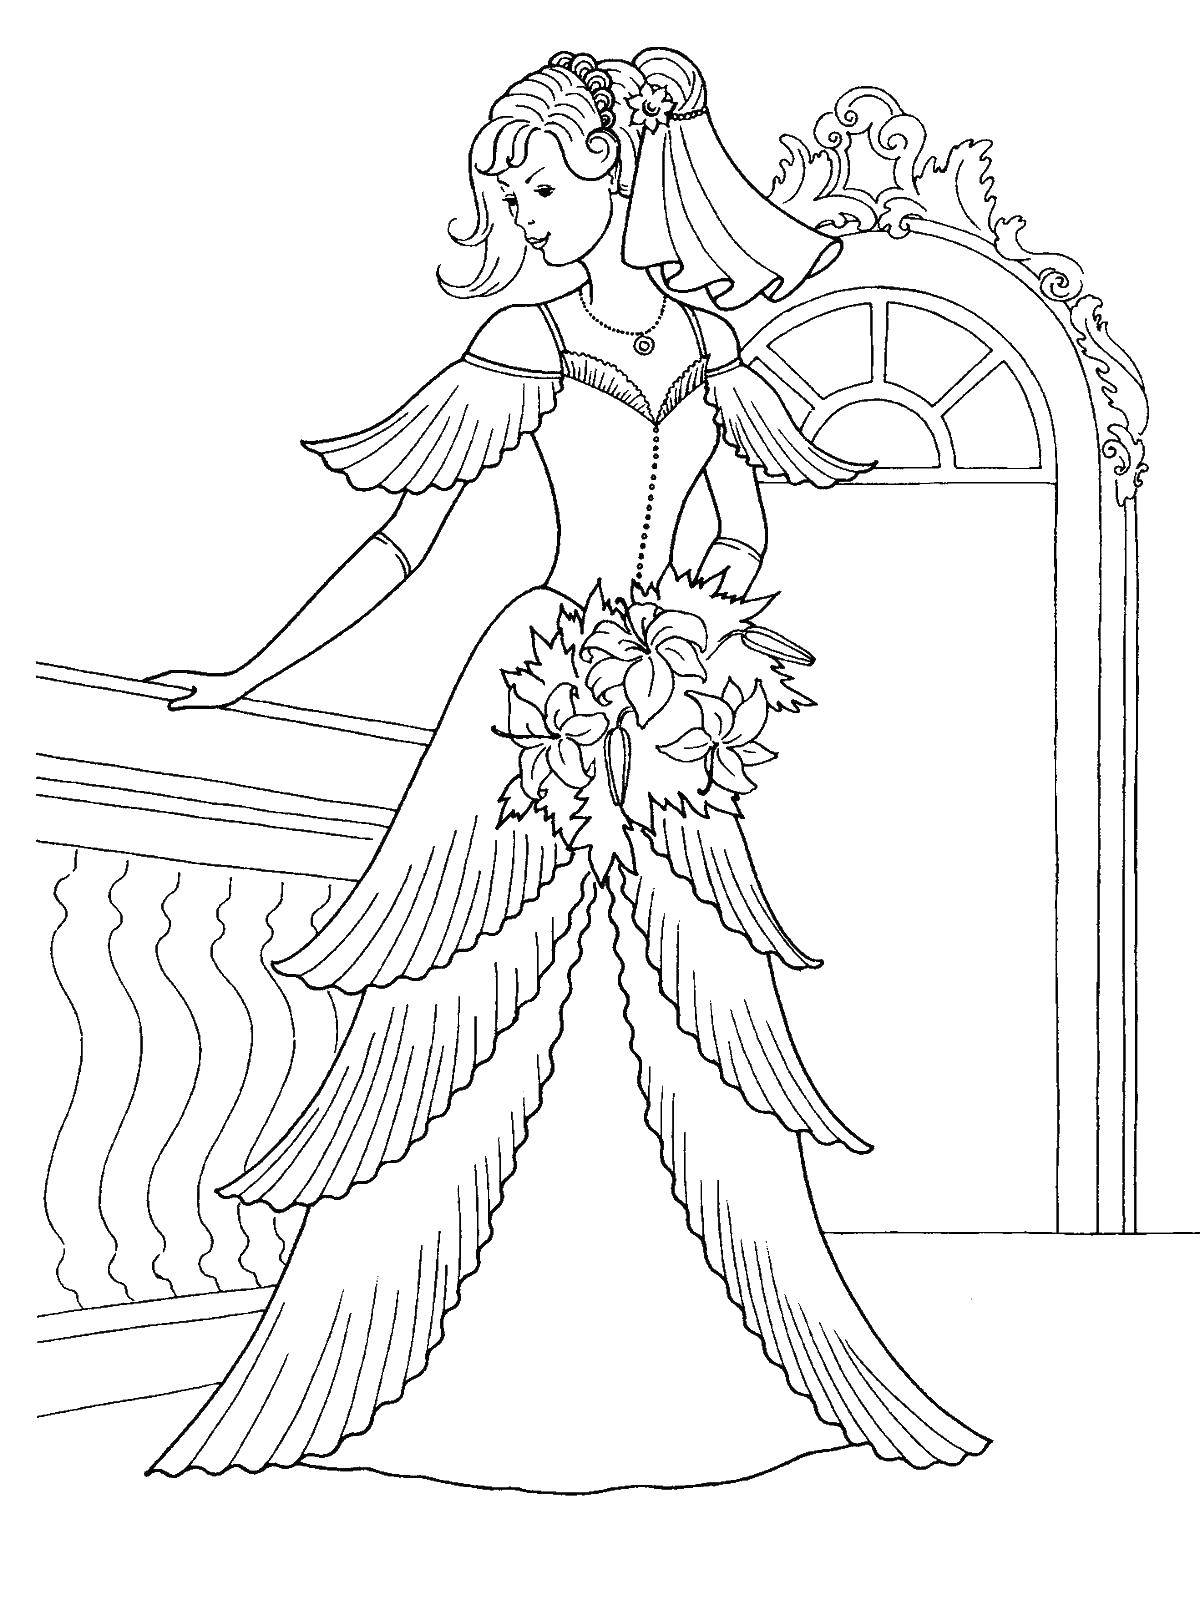 Coloring The bride on the balcony. Category Wedding. Tags:  bride, veil, bouquet.